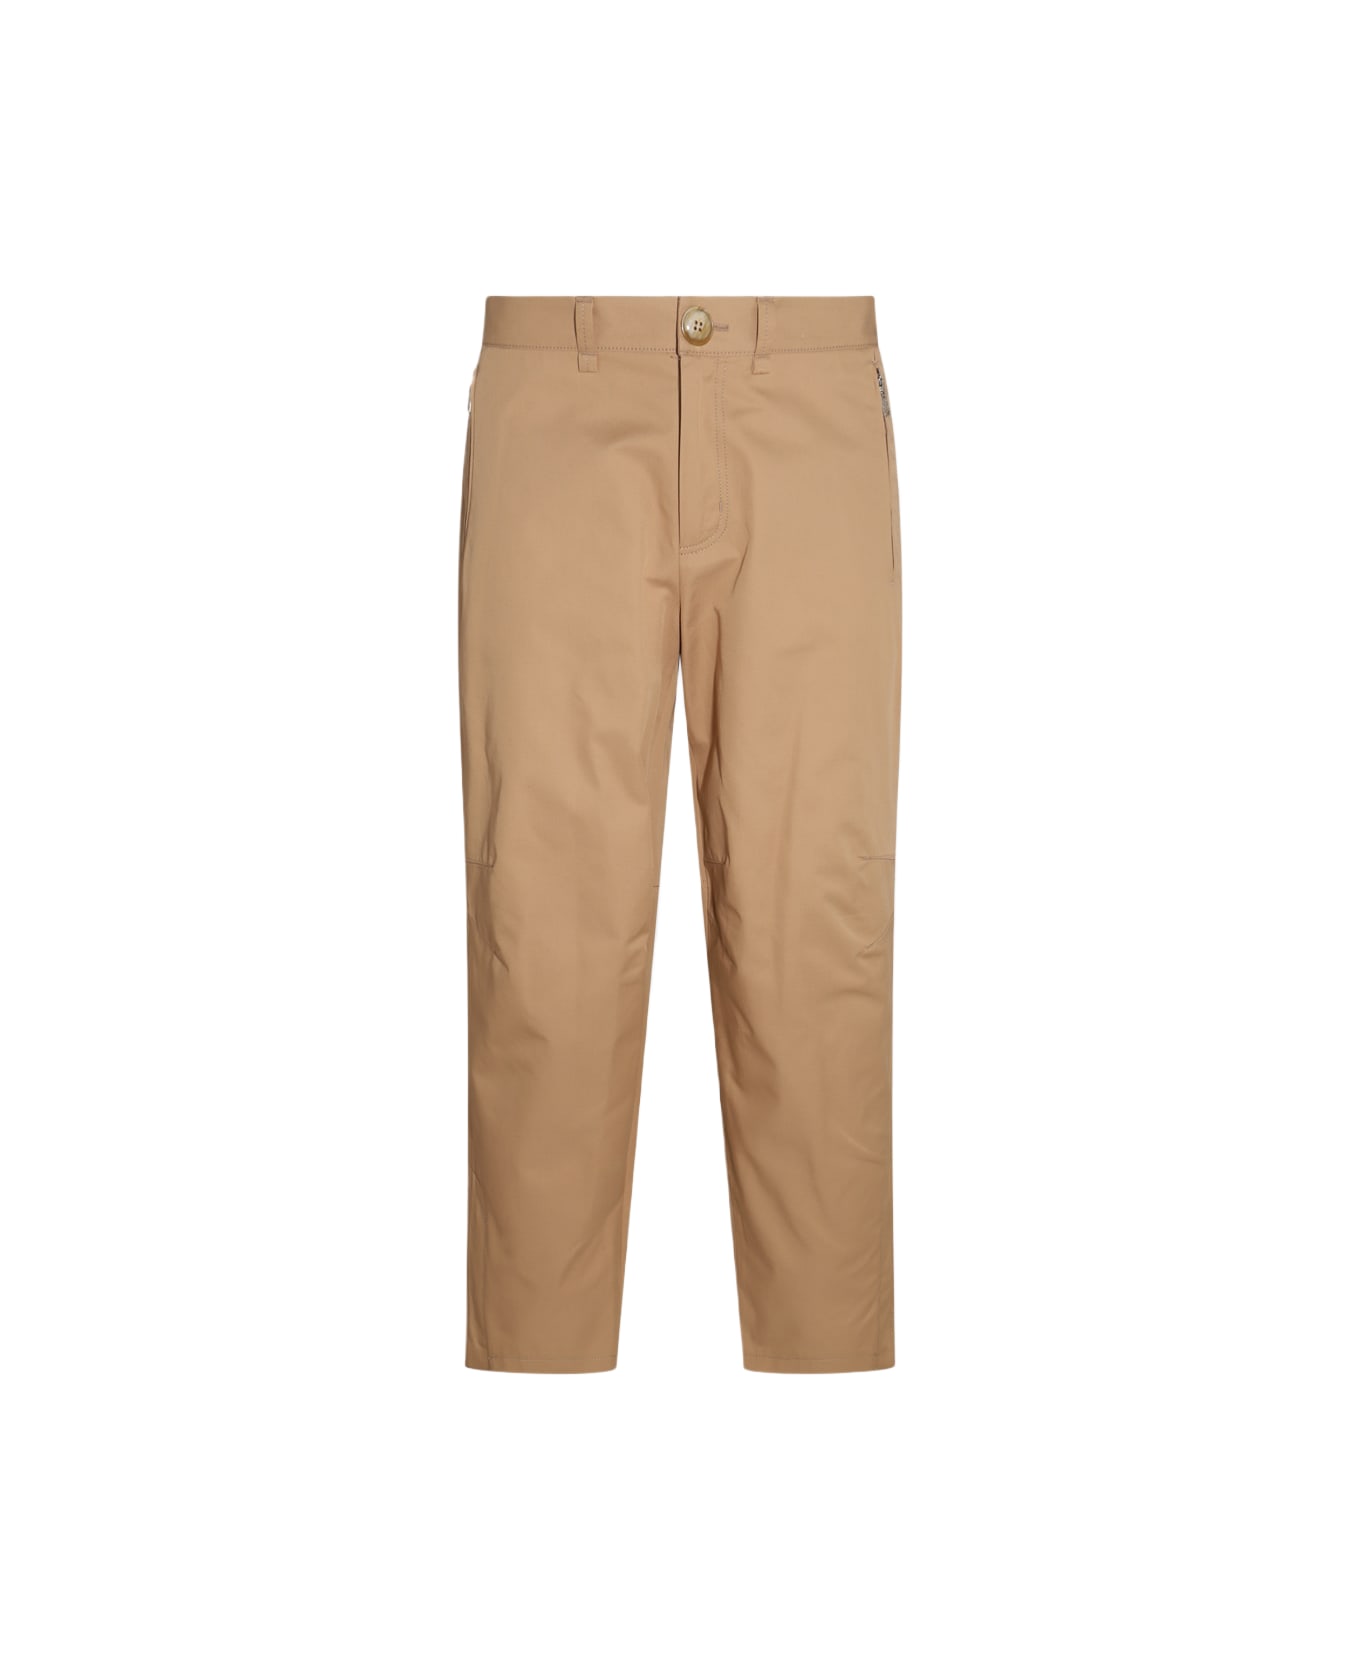 Lanvin Sand Cotton And Wool Blend Pants - SAND